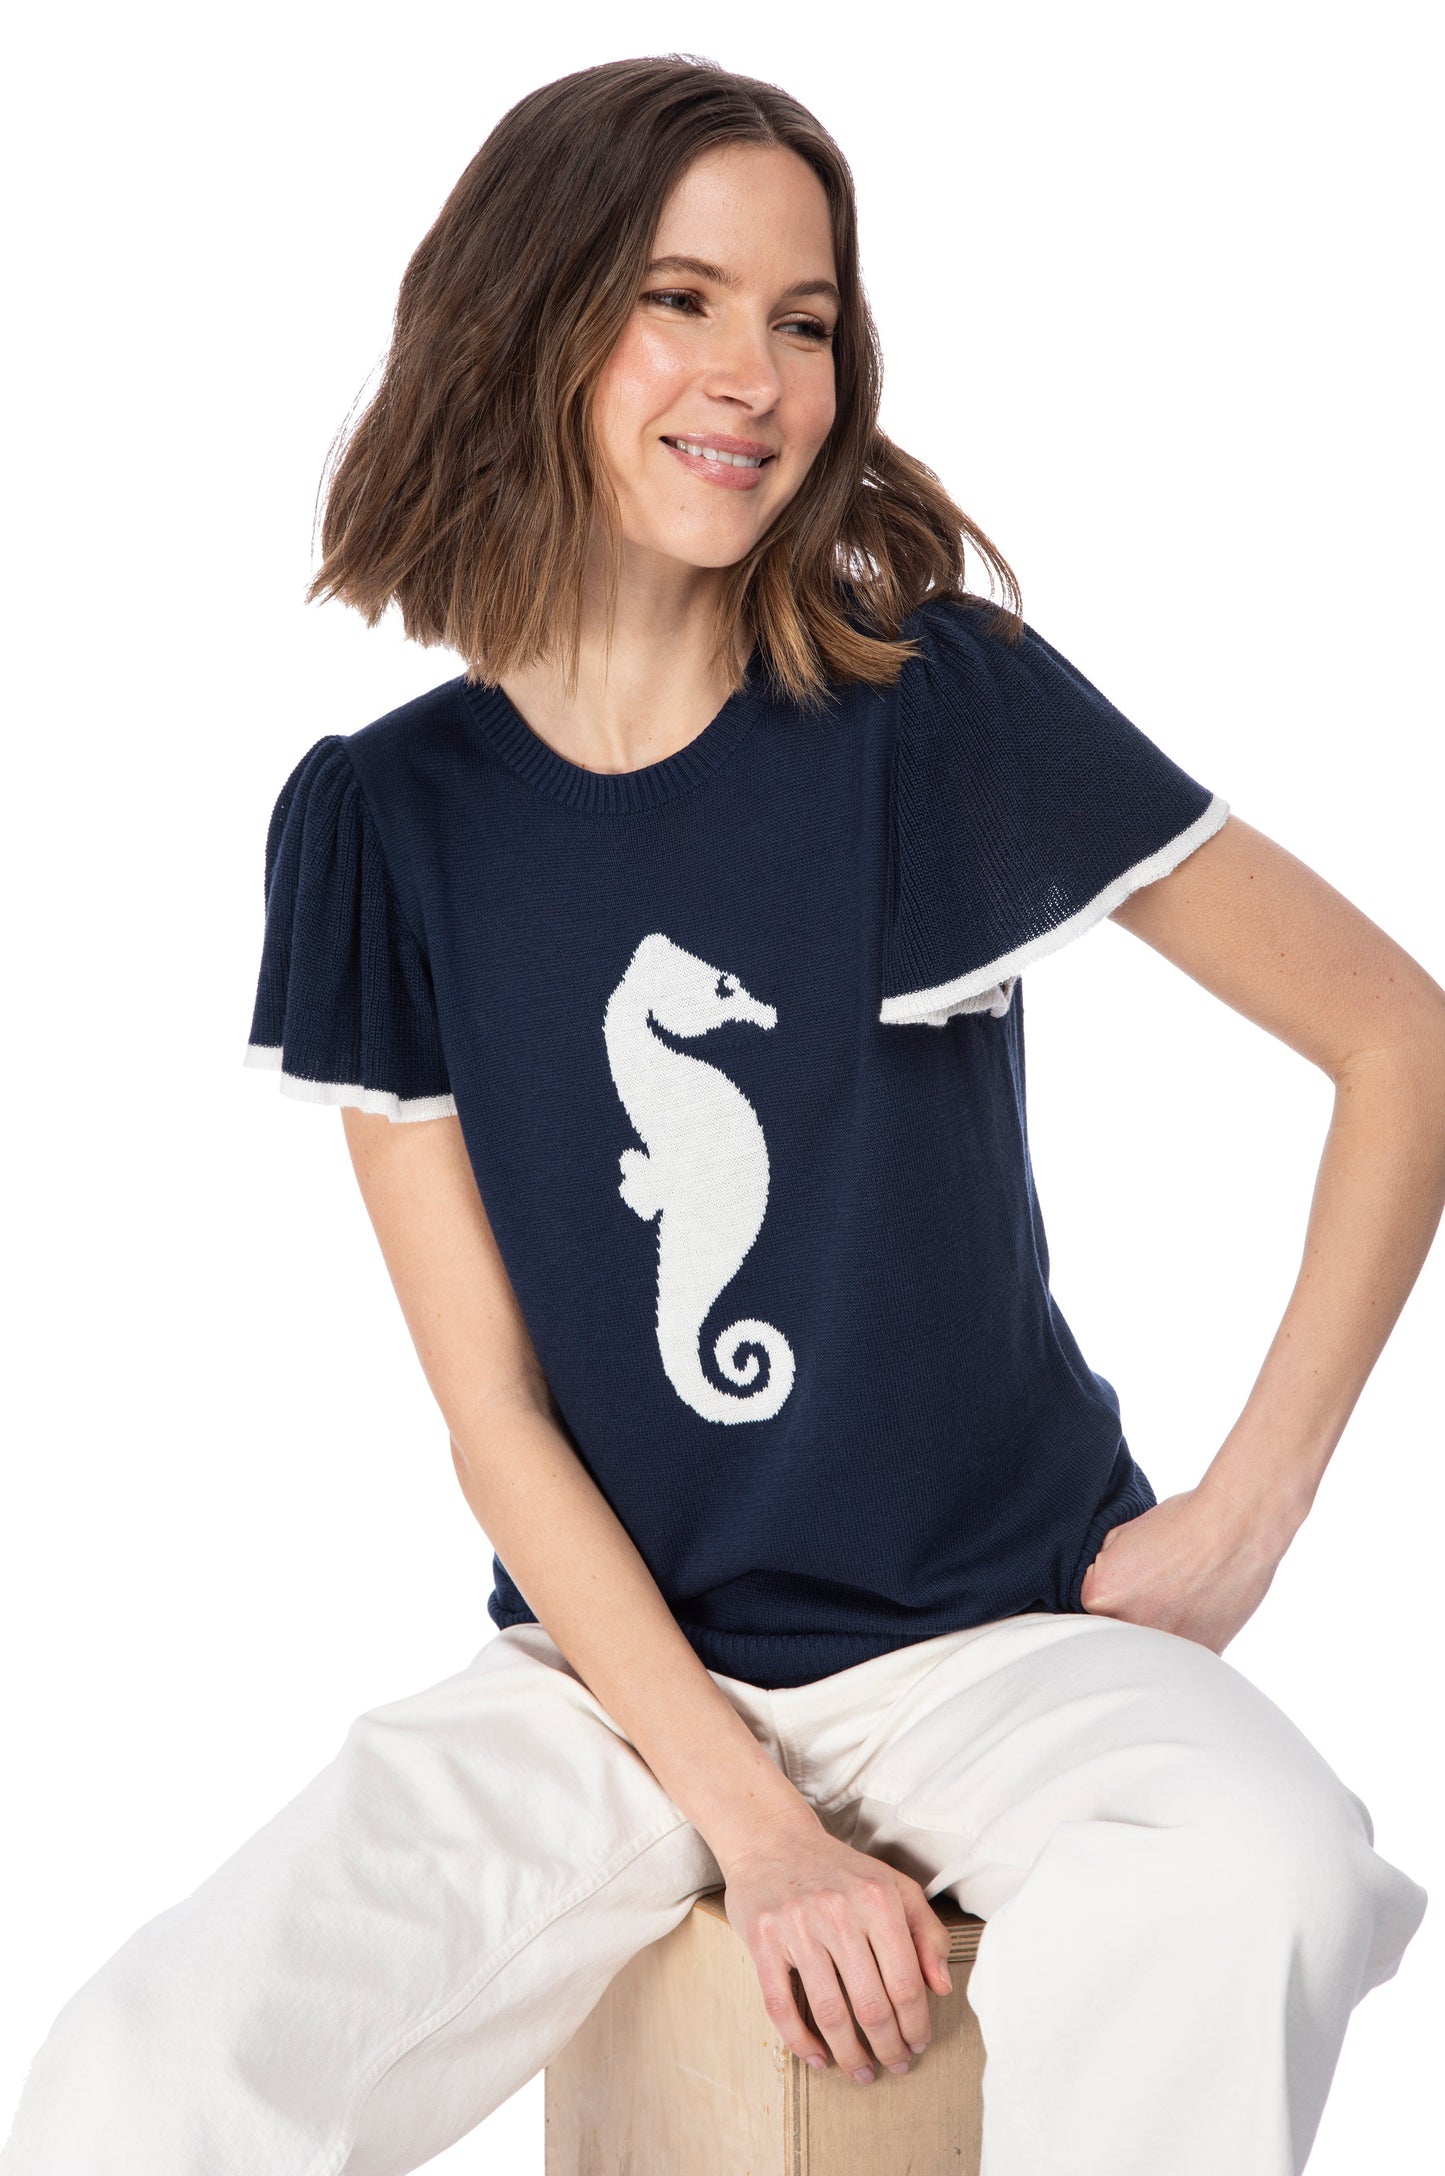 Woman in a navy blue SS flutter sleeve top by B Collection by Bobeau with a white seahorse icon design, smiling gently as she poses casually.